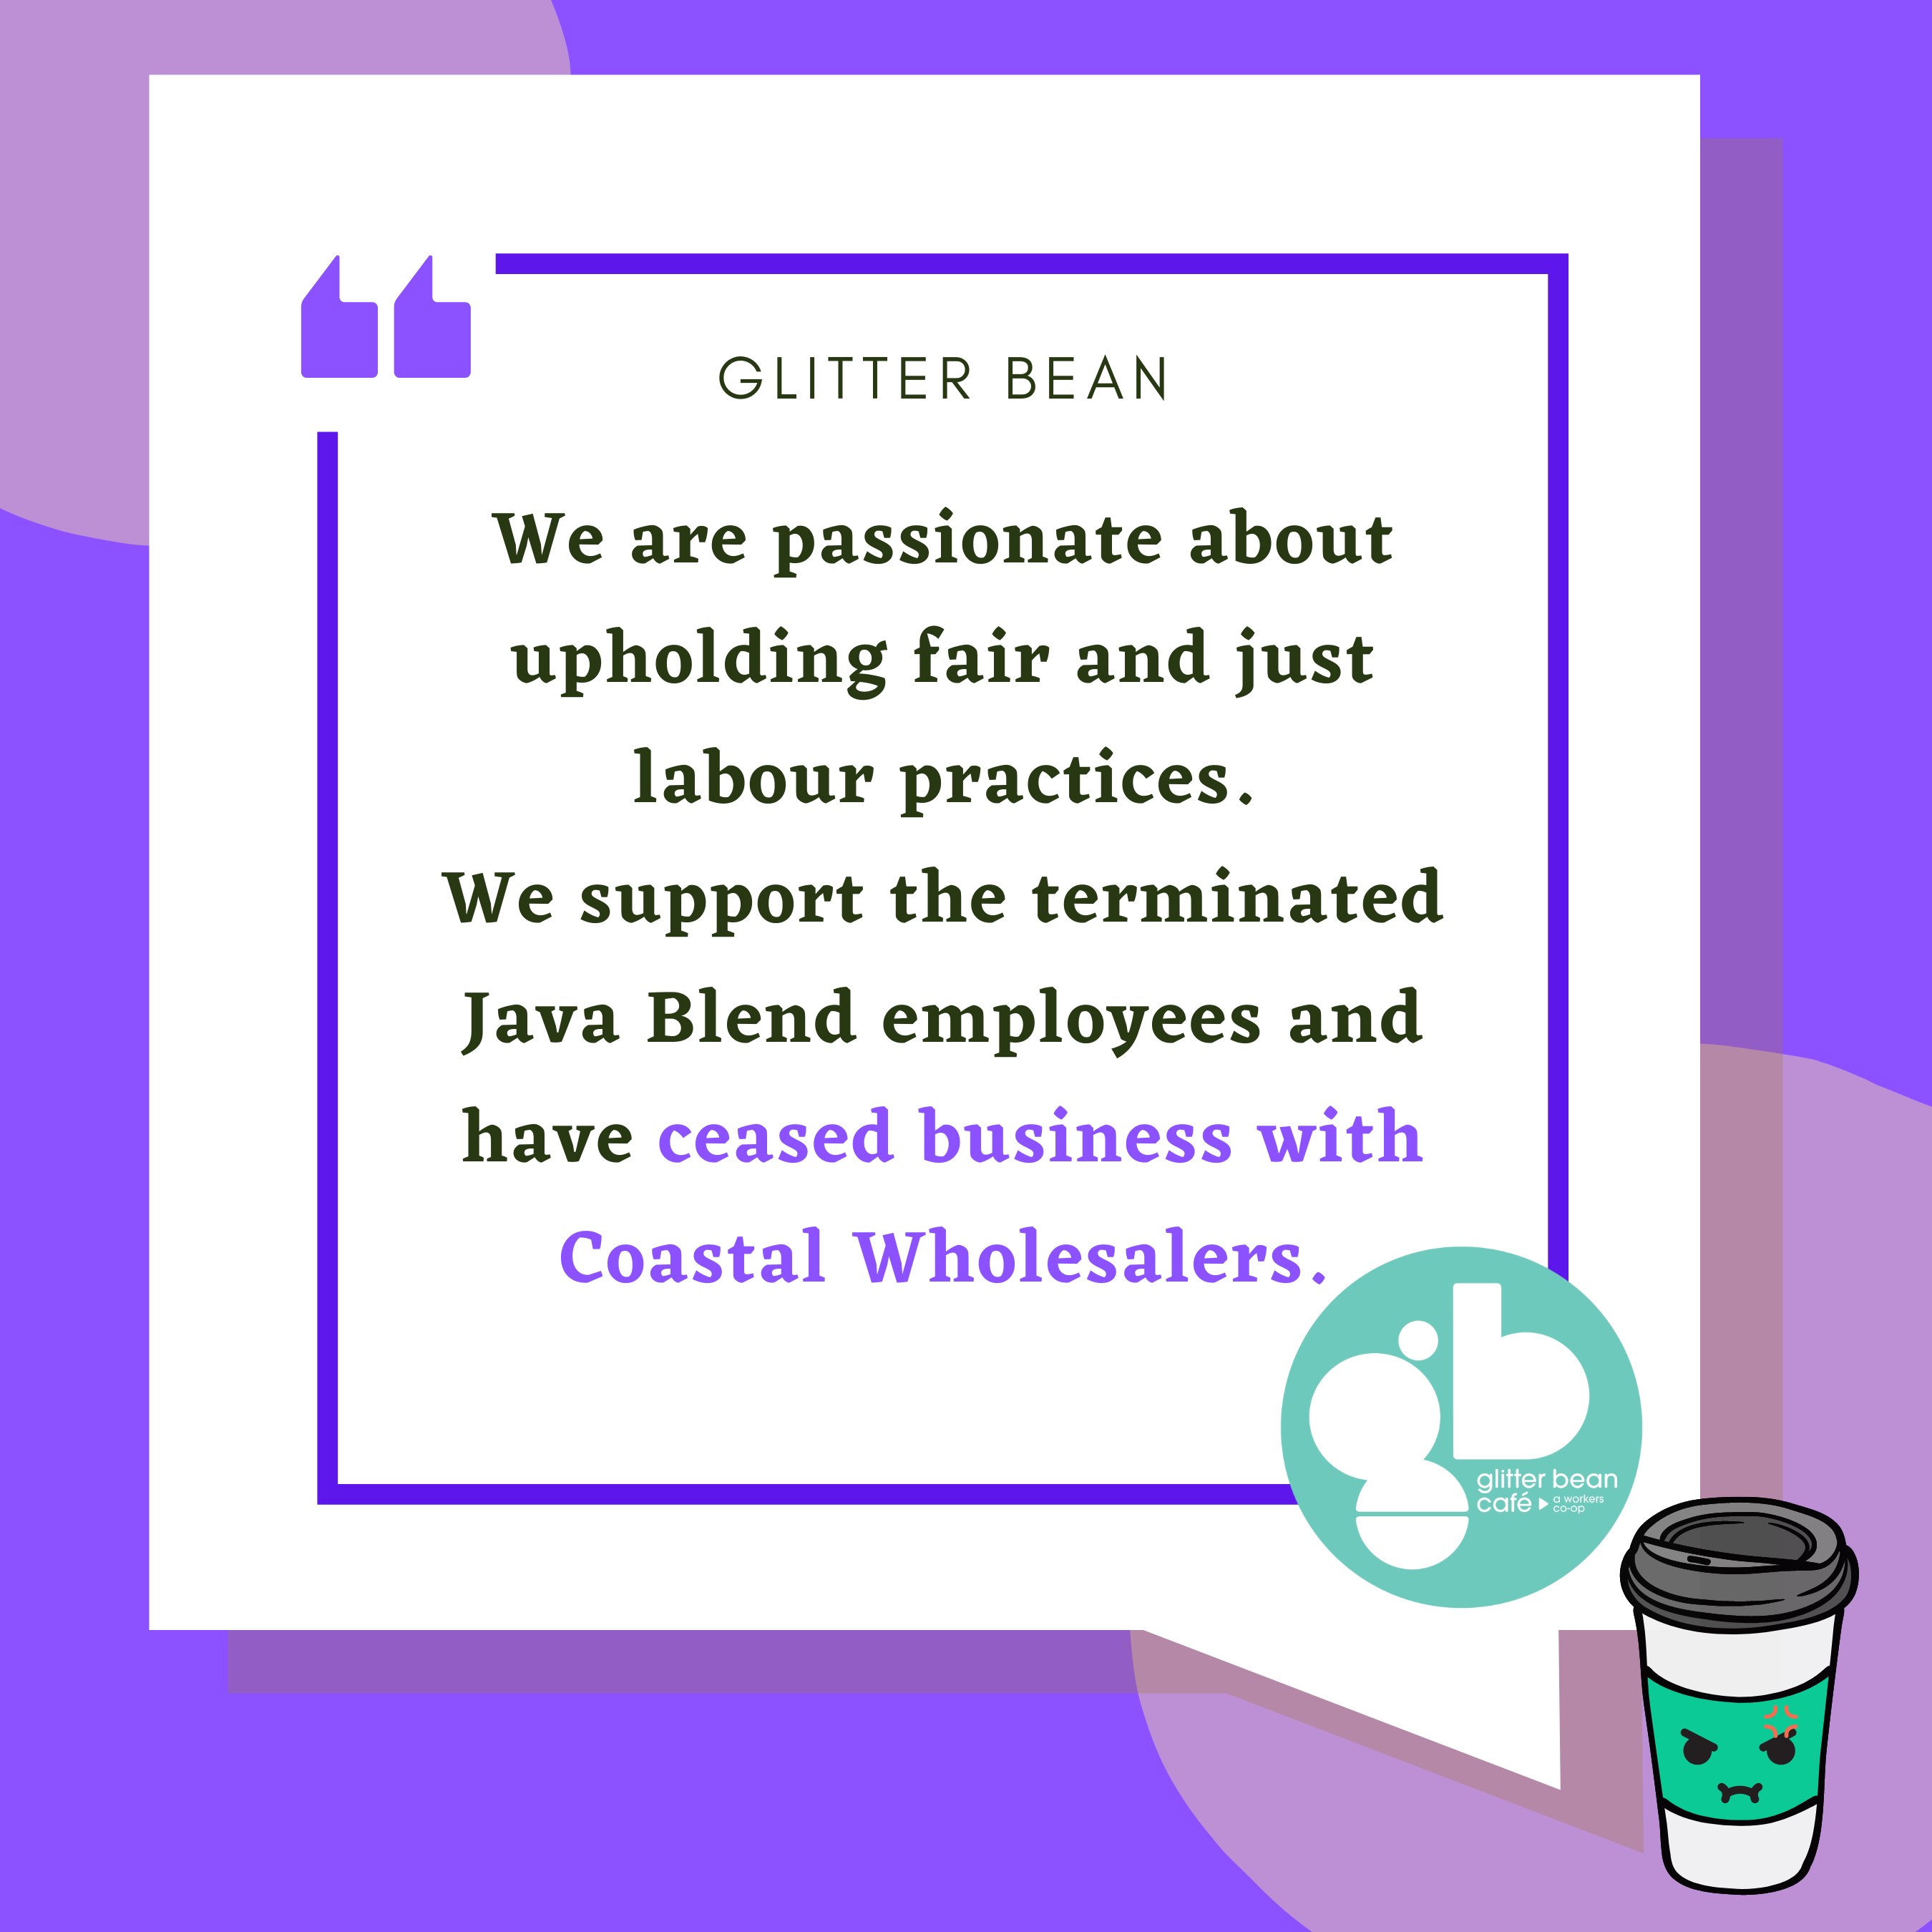 We are passionate about upholding fair and just labour practices. We support the terminated Java Blend employees and have ceased business with Coastal Wholesalers. - Glitter Bean